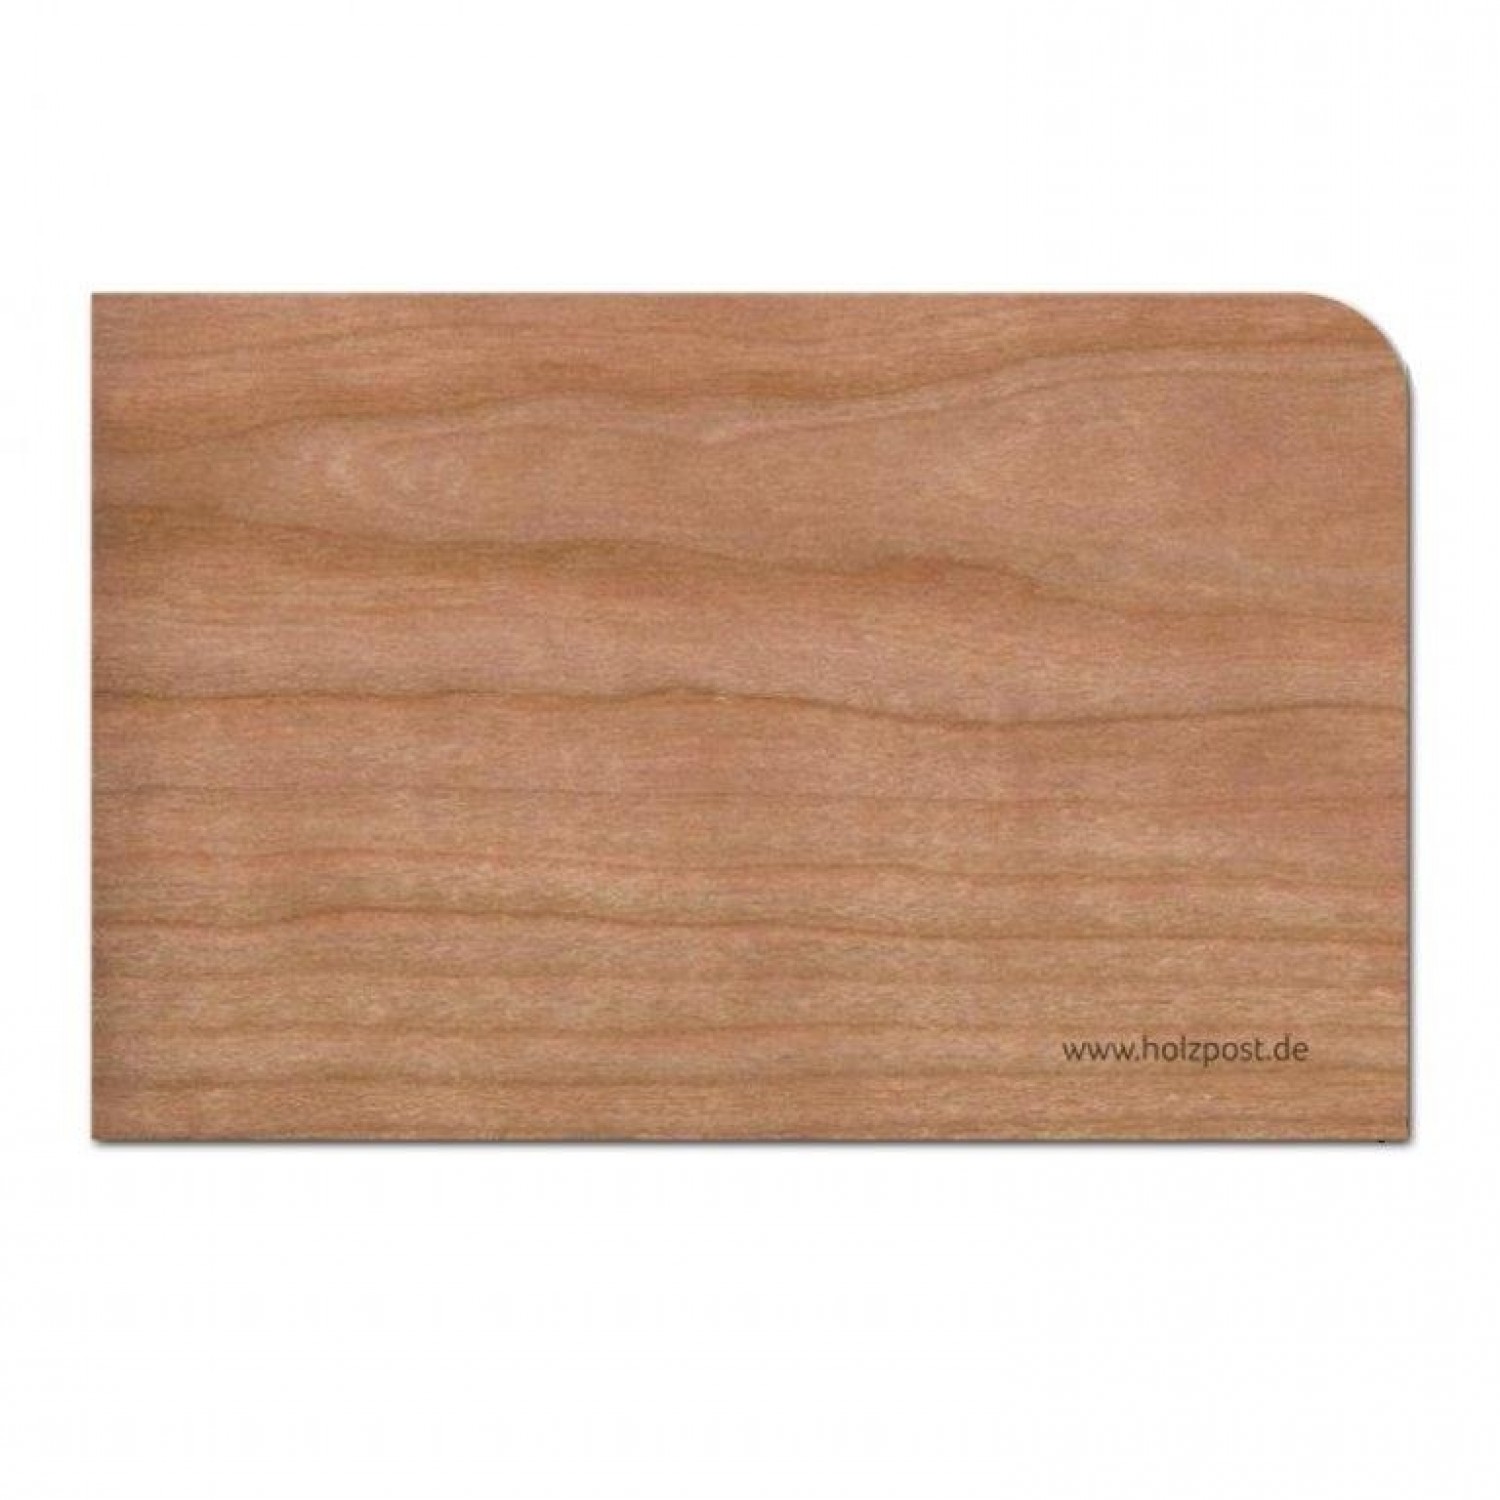 Eco Greeting Card "Blank" made of cherry wood | holzpost